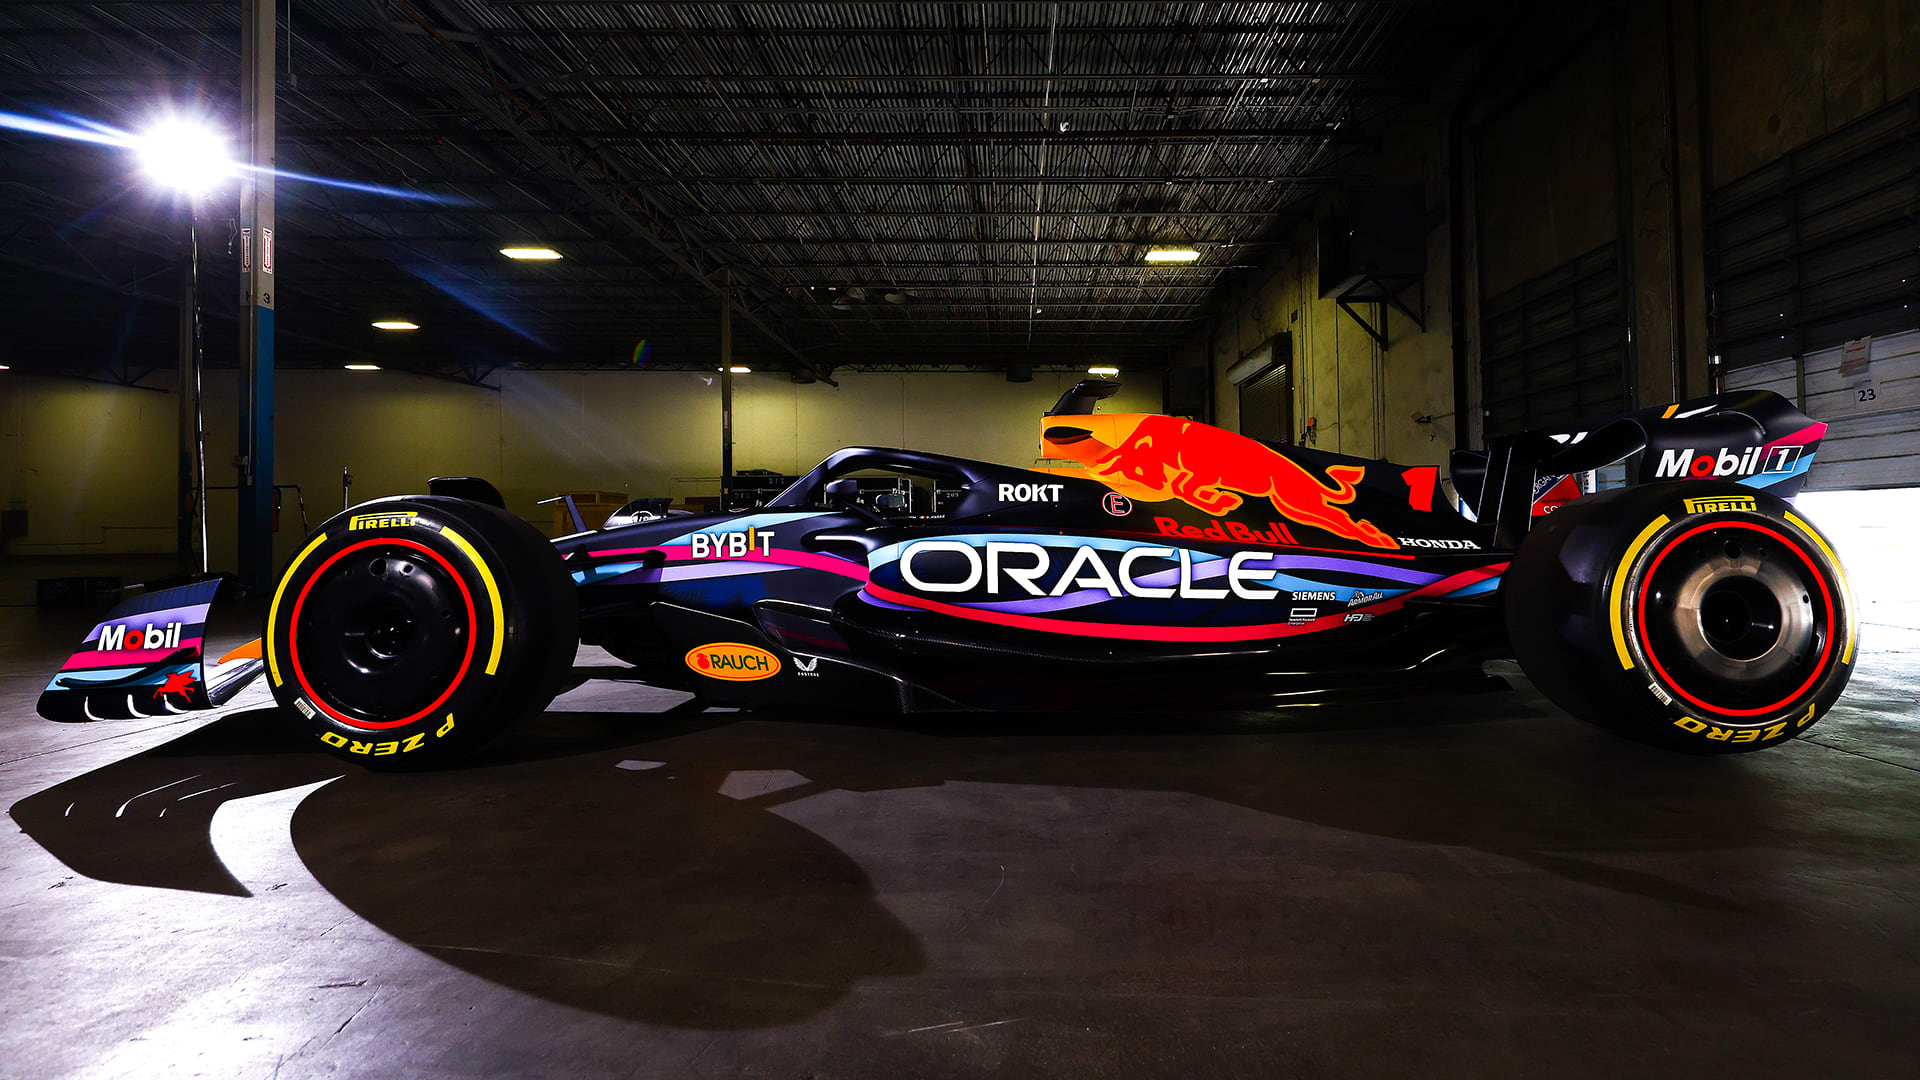 FIRST LOOK: Red Bull Reveal Striking Fan Designed Livery For Miami Grand Prix. Formula 1®